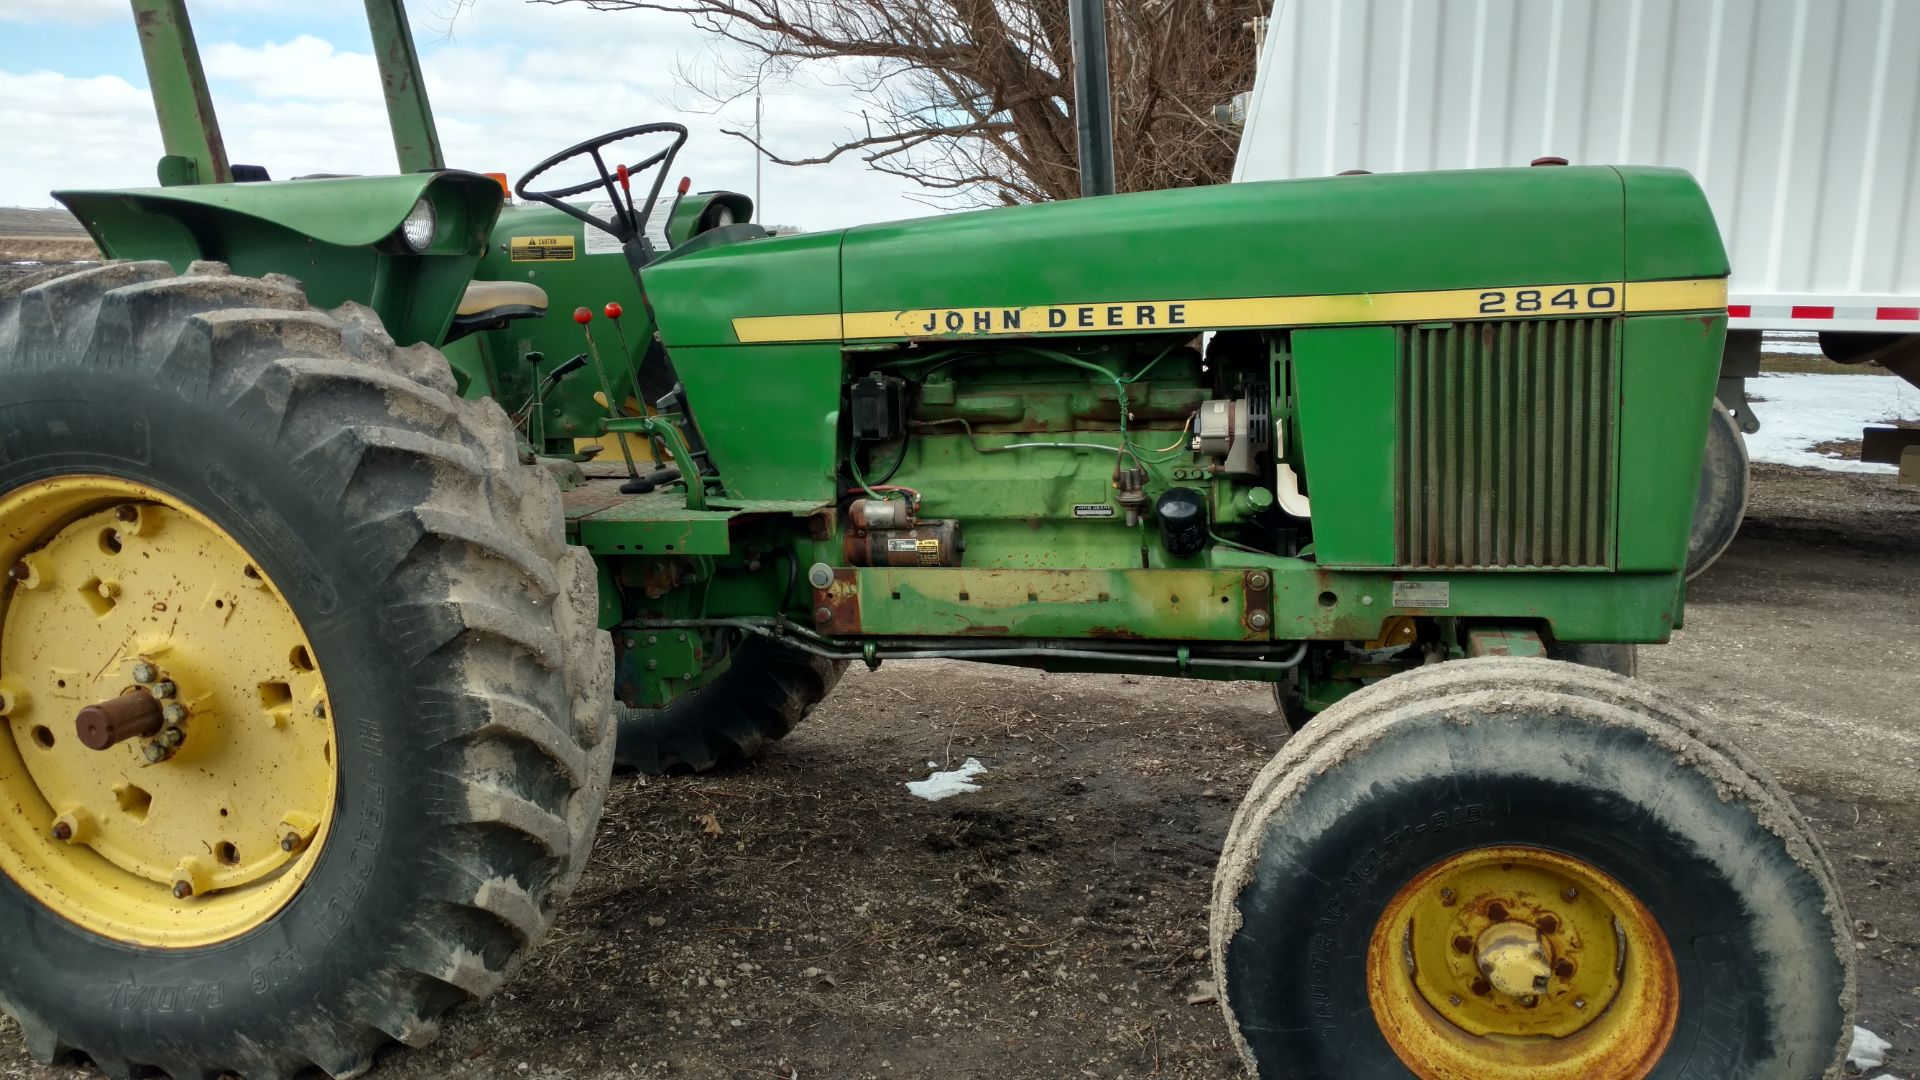 1979 JD 2840 tractor w/canopy, wide front, dual hyd. outlets, like new 18.4/34 tires;